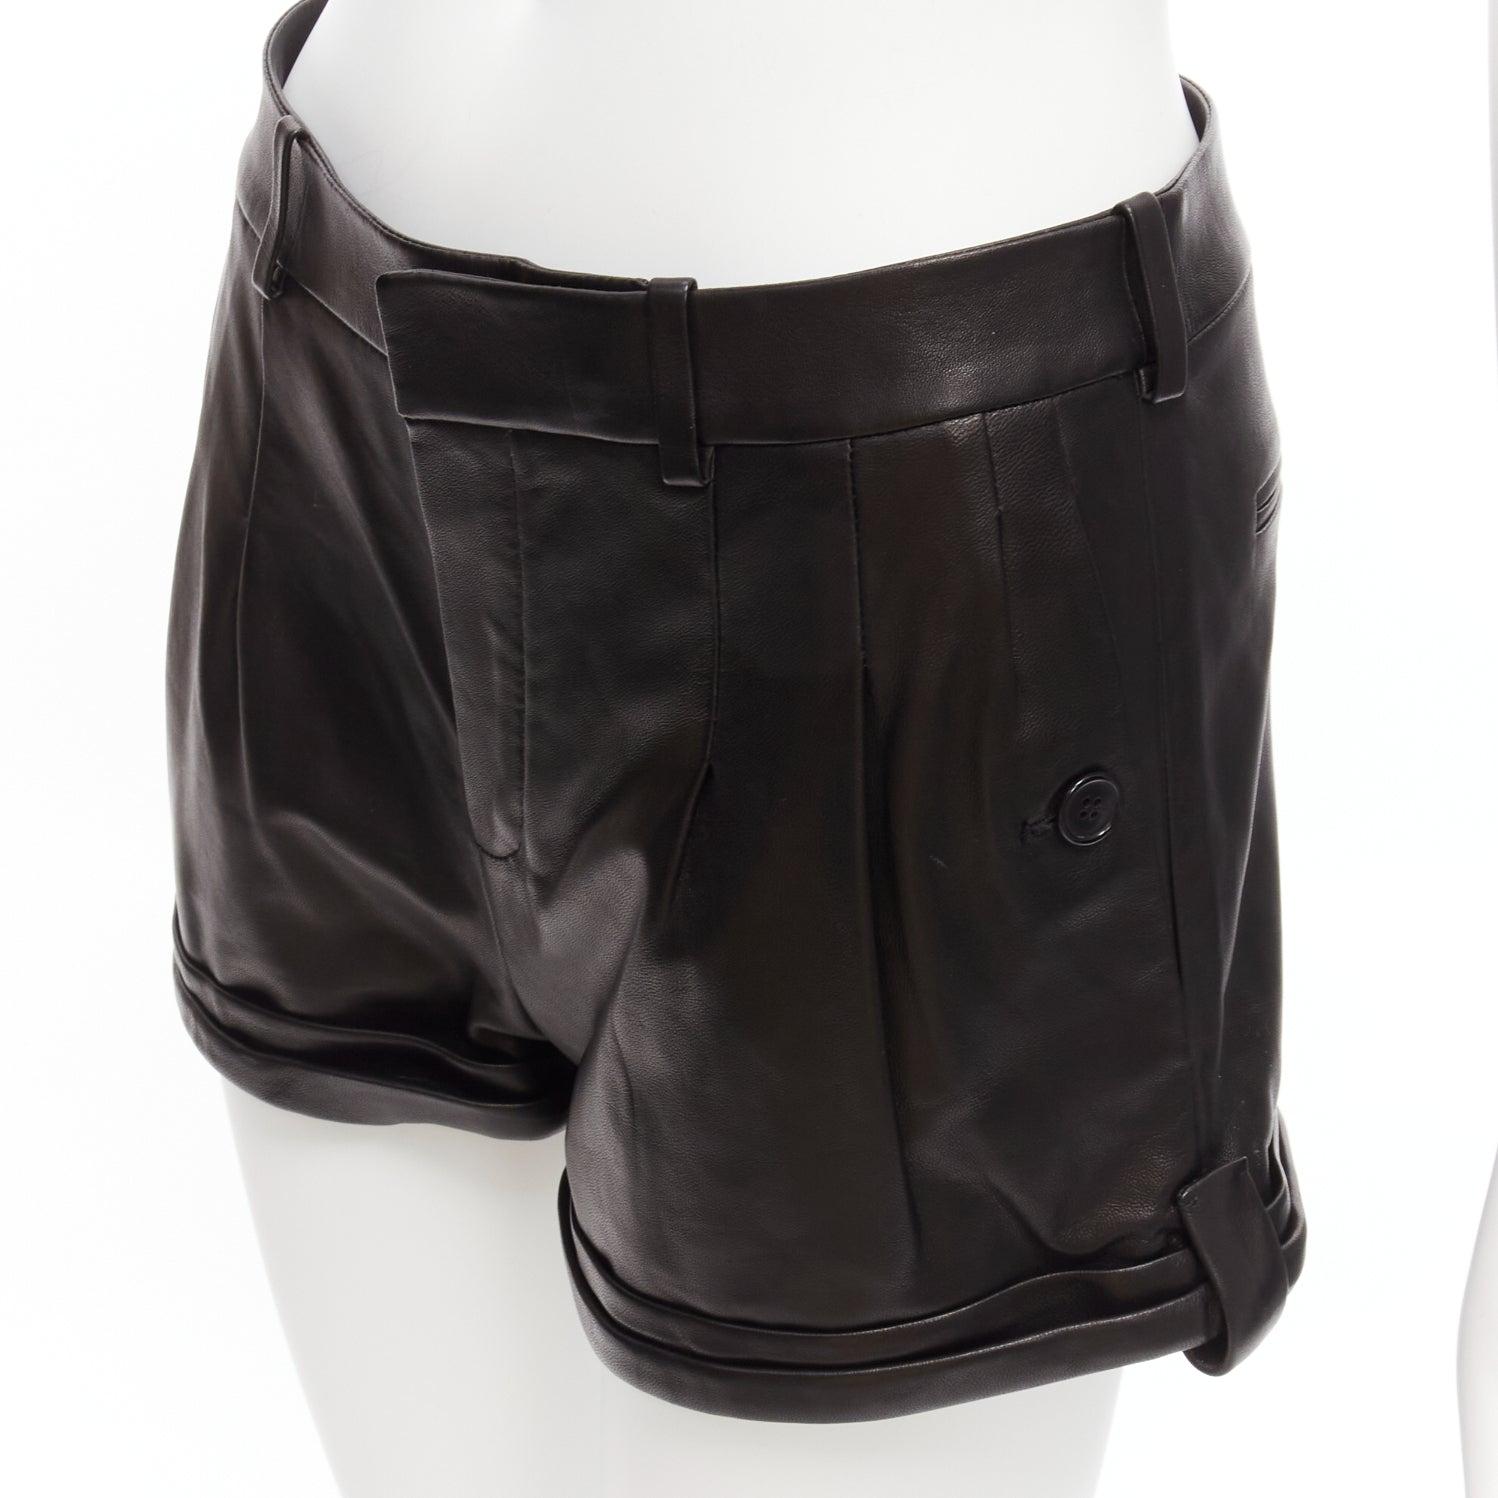 SAINT LAURENT 2017 black lambskin leather high waisted cuffed shorts FR36 S
Reference: TGAS/D00666
Brand: Saint Laurent
Collection: 2017
Material: Lambskin Leather
Color: Black
Pattern: Solid
Closure: Zip Fly
Lining: Black Fabric
Made in: